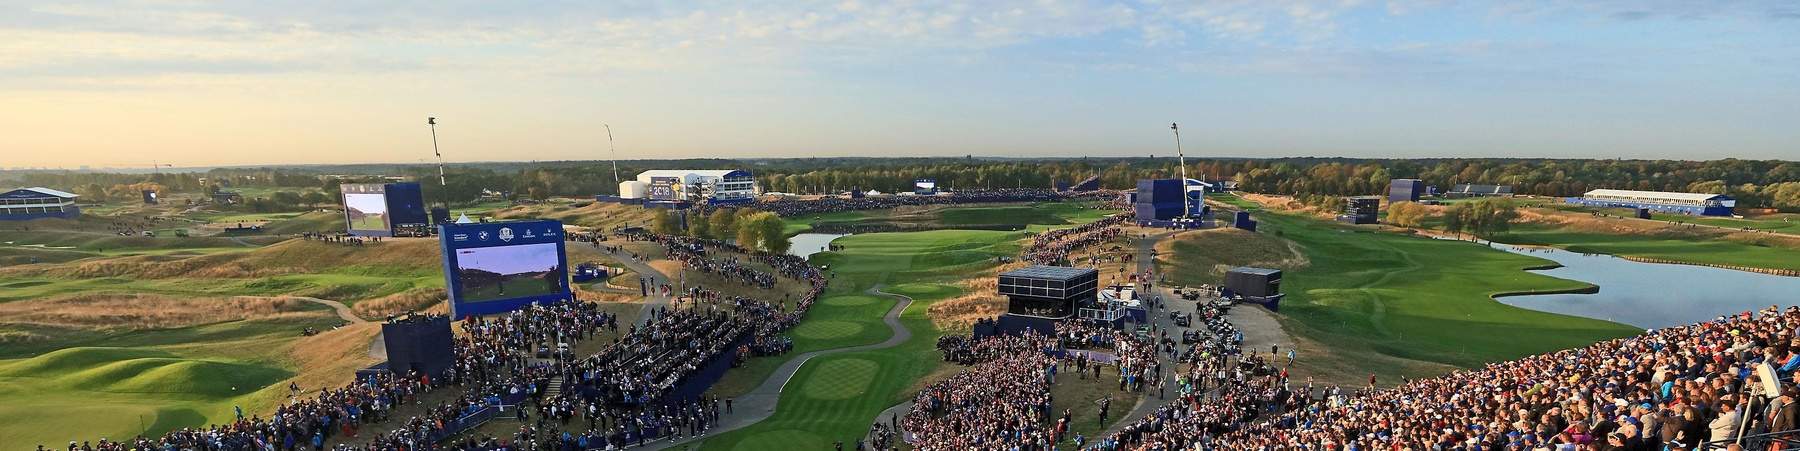 The 2018 Ryder Cup cropat Le Golf National GettyImages